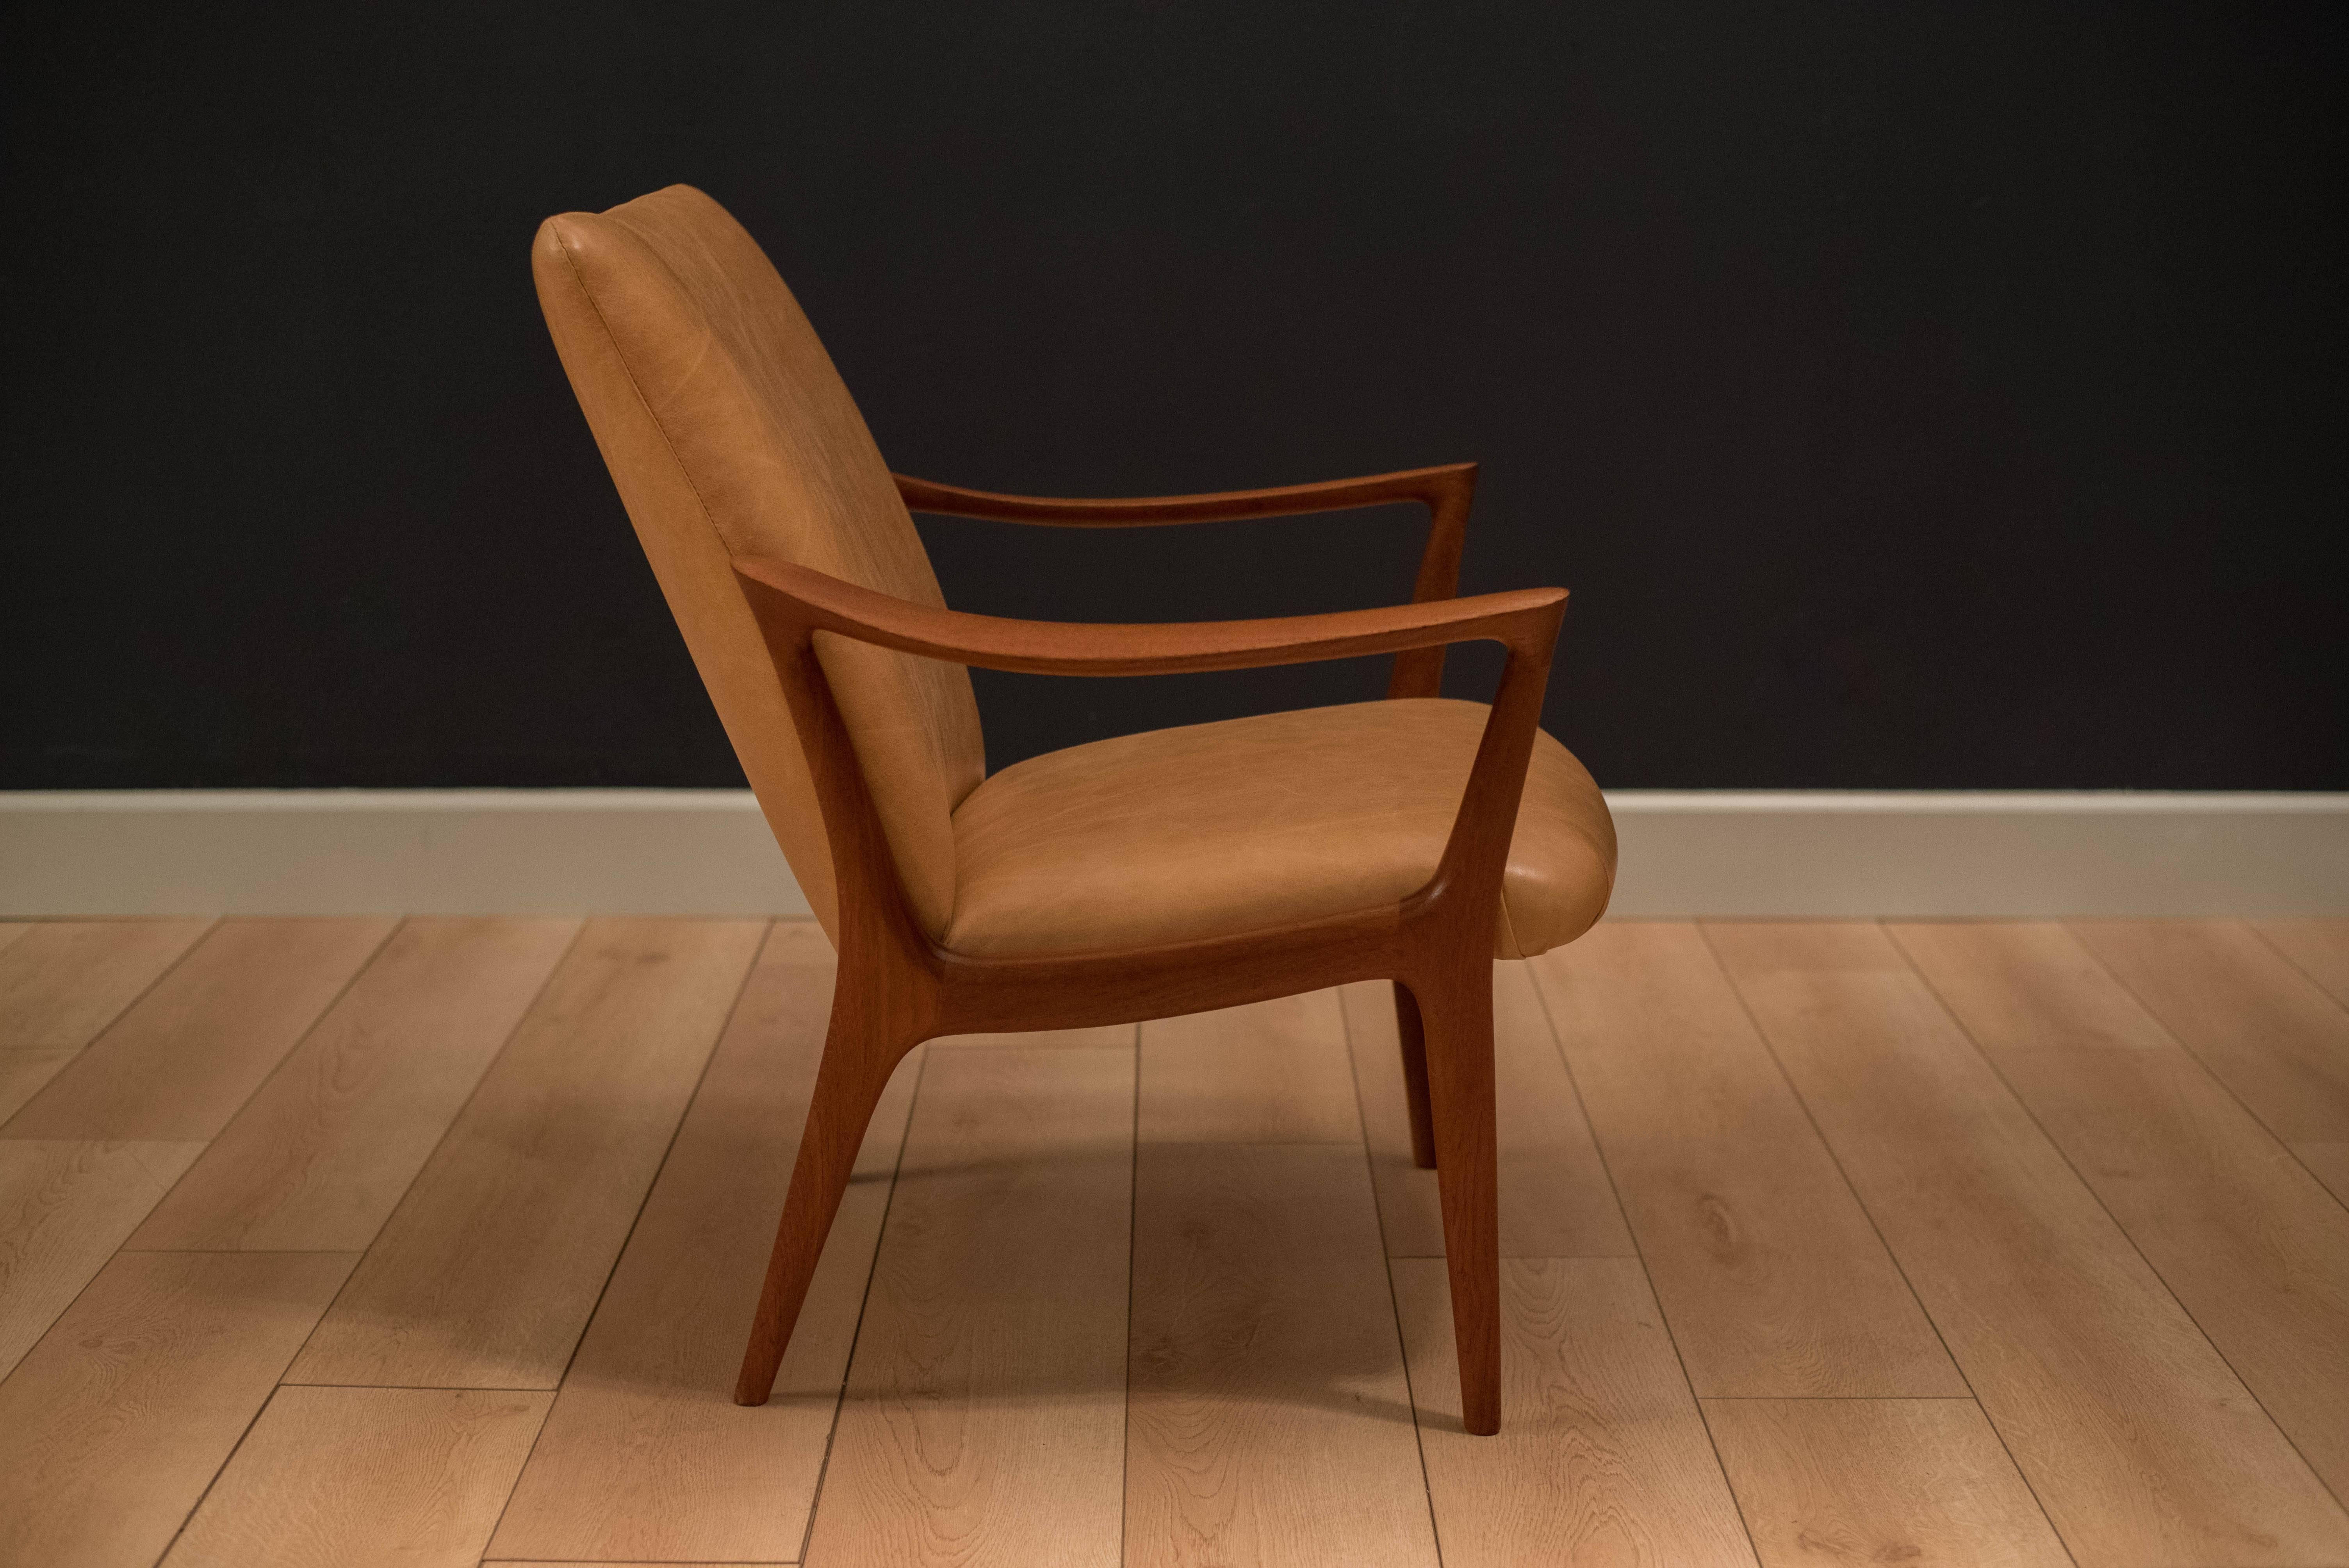 Mid-Century Modern teak armchair by Per Øie made in Norway. This piece features a stunning solid sculpted teak frame and has been reupholstered in tan leather. 

